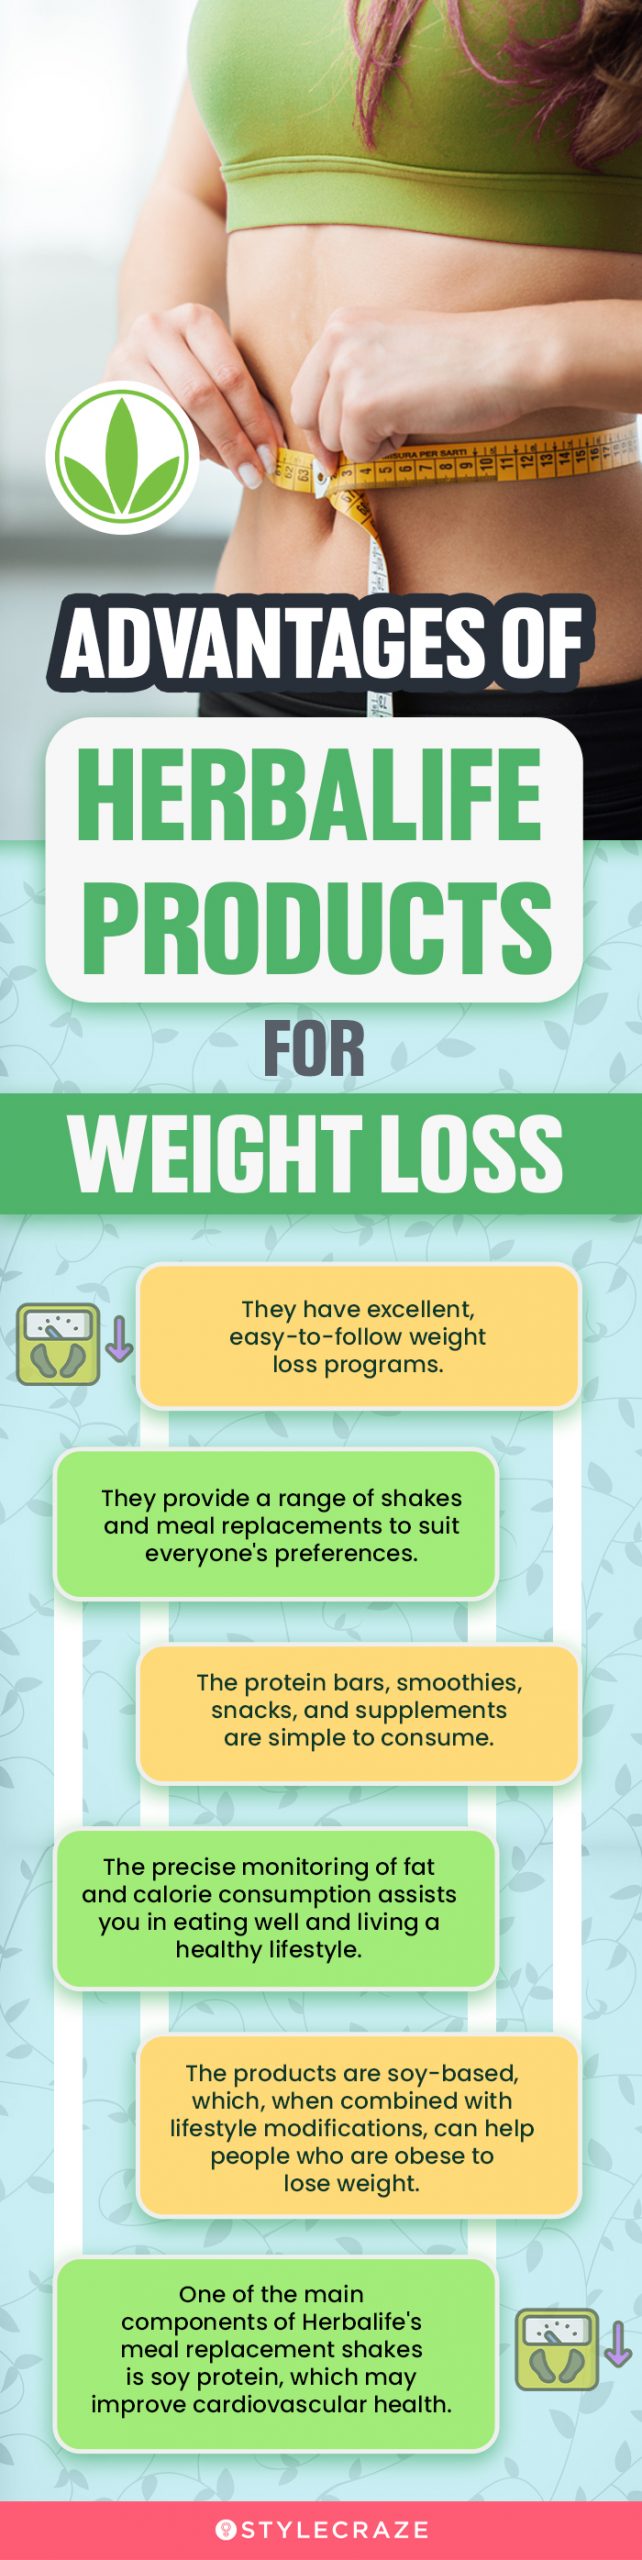 advantages of herbalife products for weight loss (infographic)